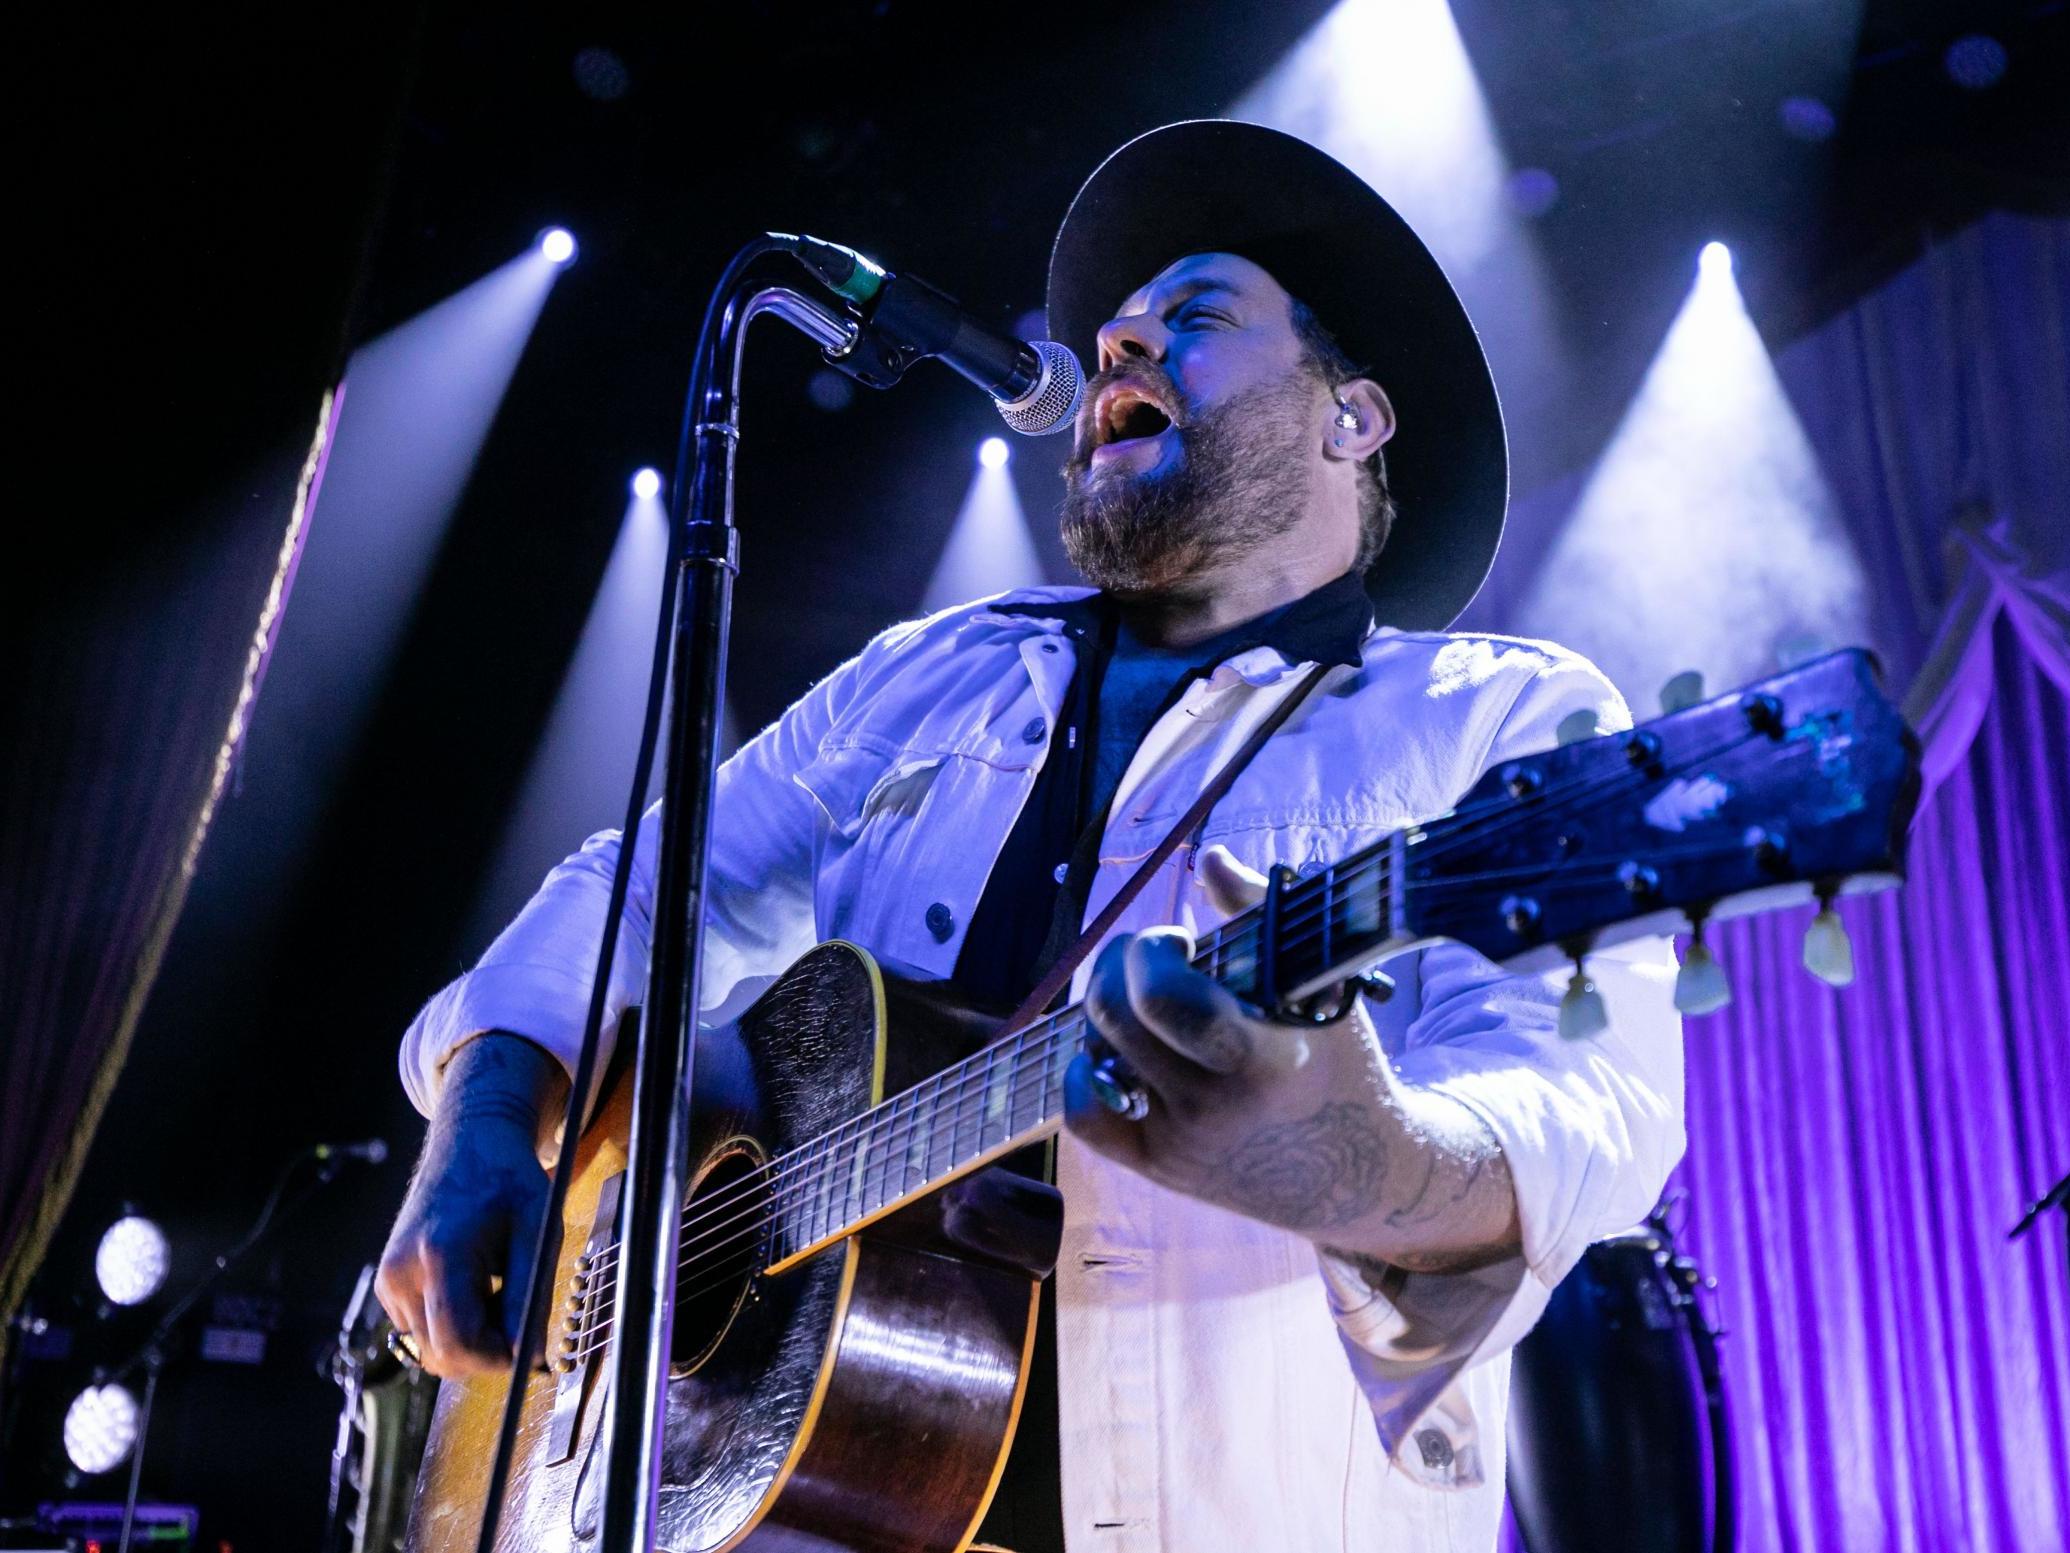 Songwriter Nathaniel Rateliff has an imposing, soulful voice